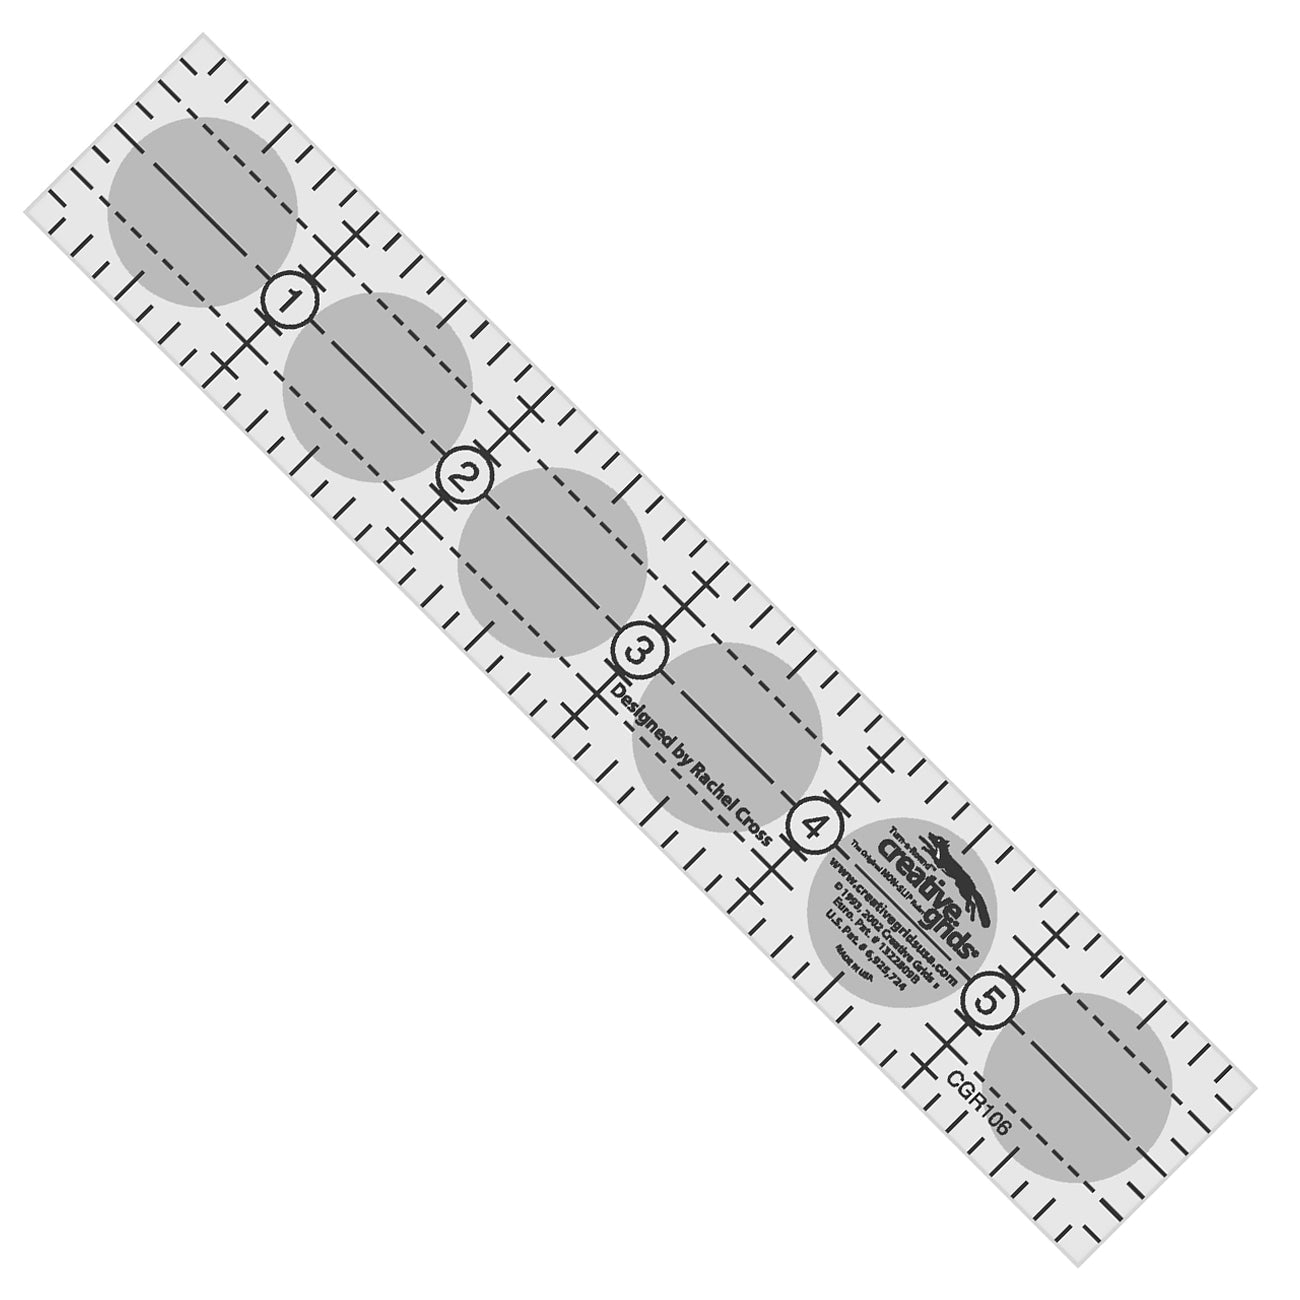 Creative Grids 1-Inch x 6-Inch Quilt Ruler (CGR106)